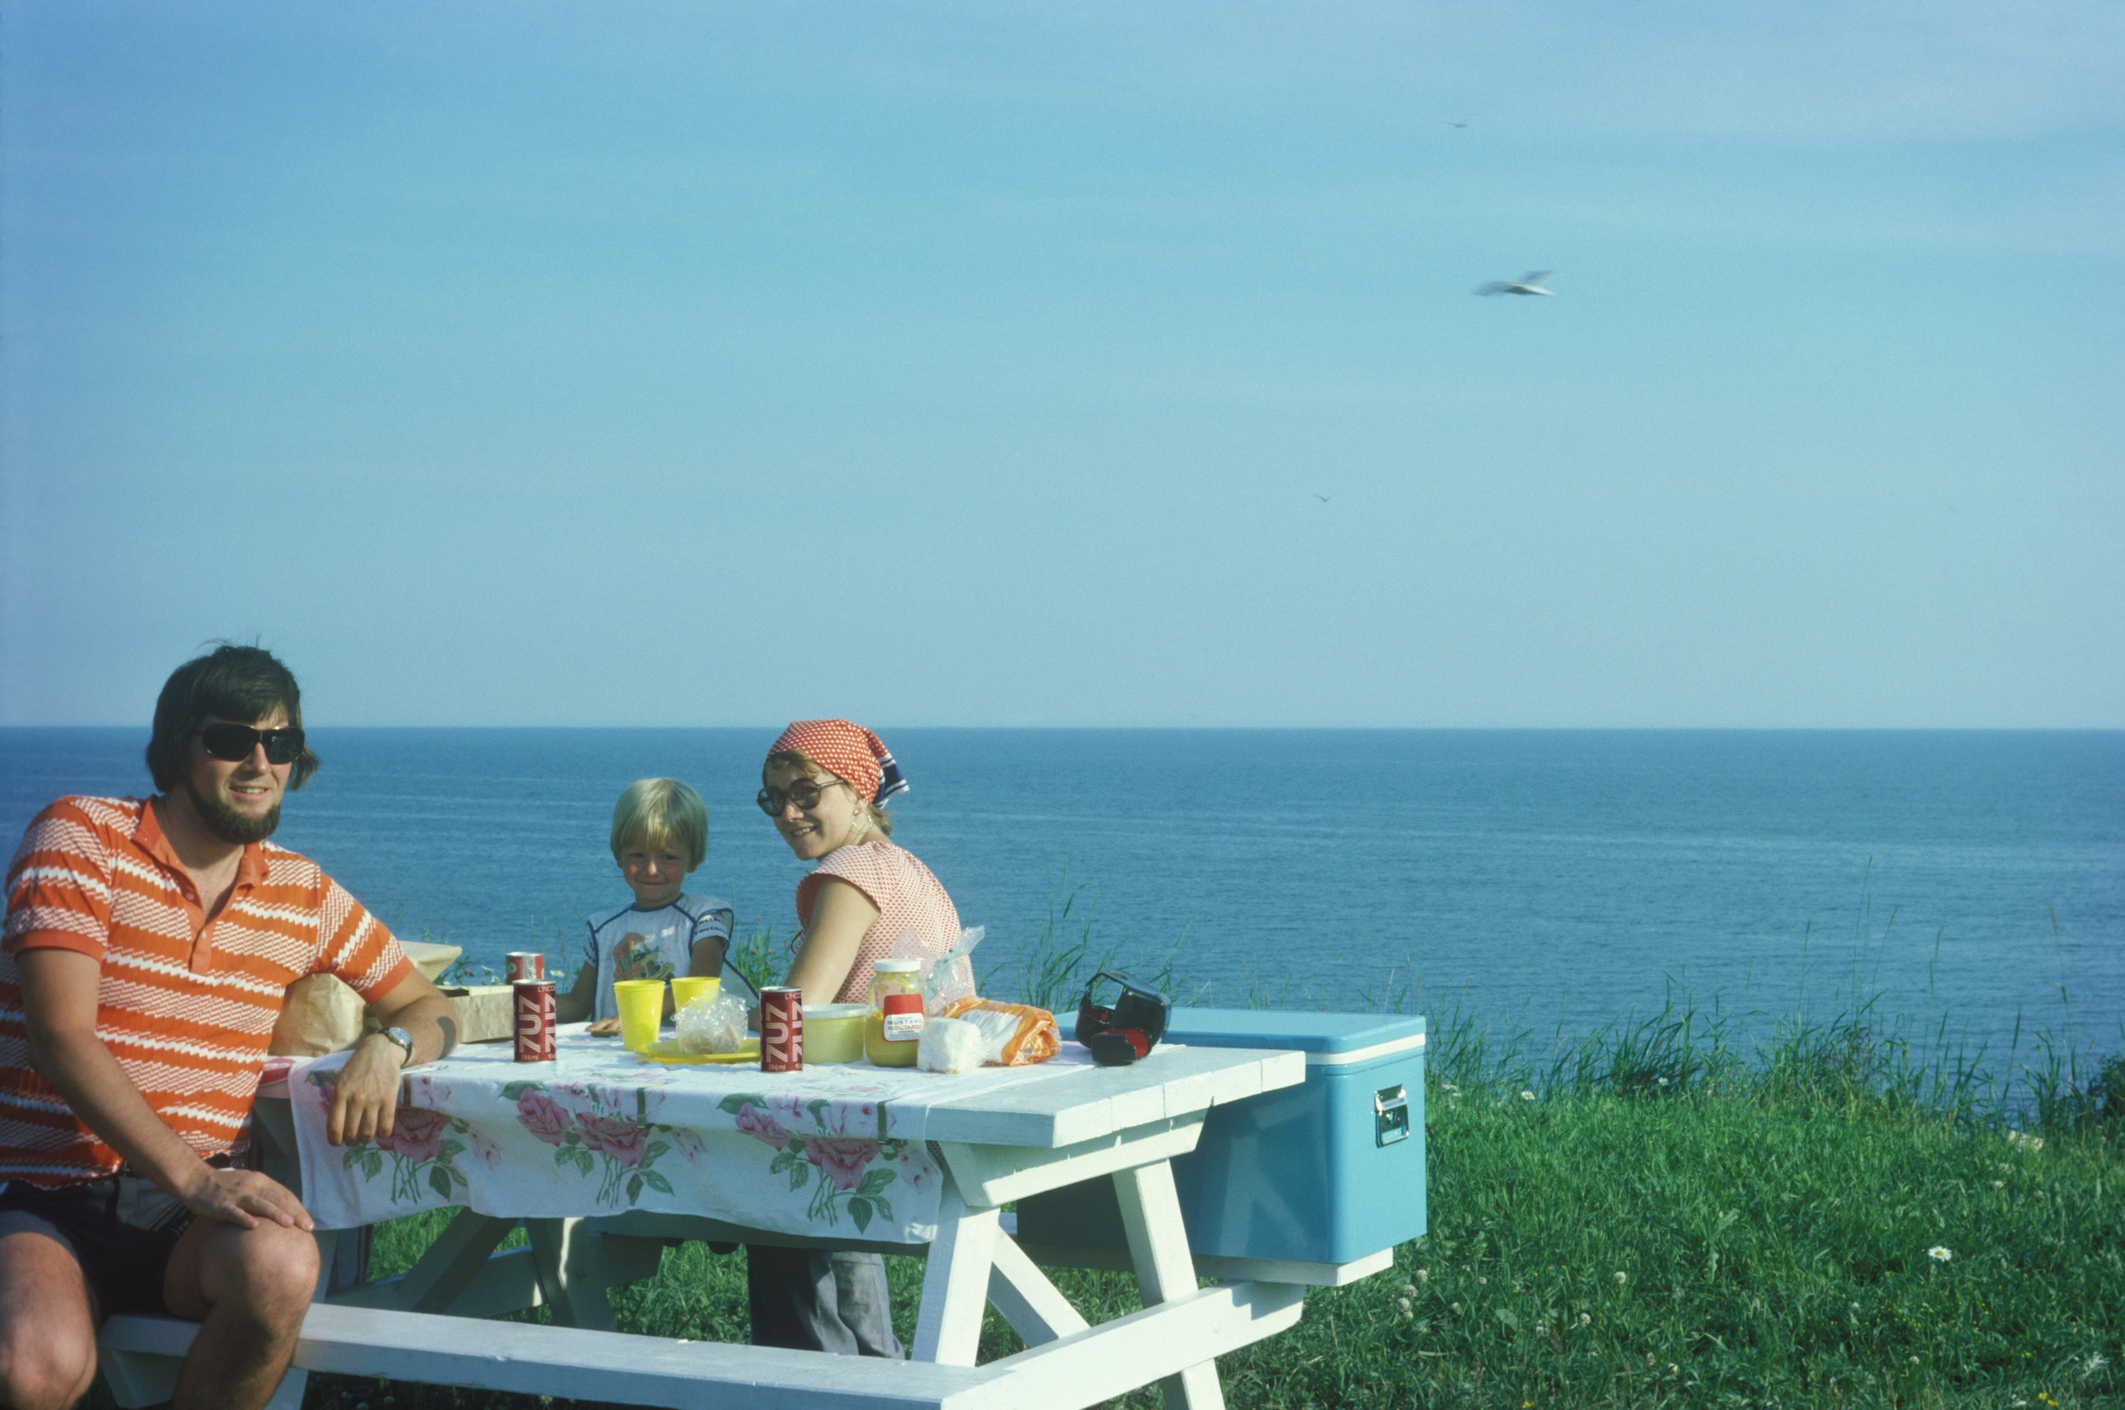 Family picnic by the sea with two adults and a child at a table, enjoying a sunny day